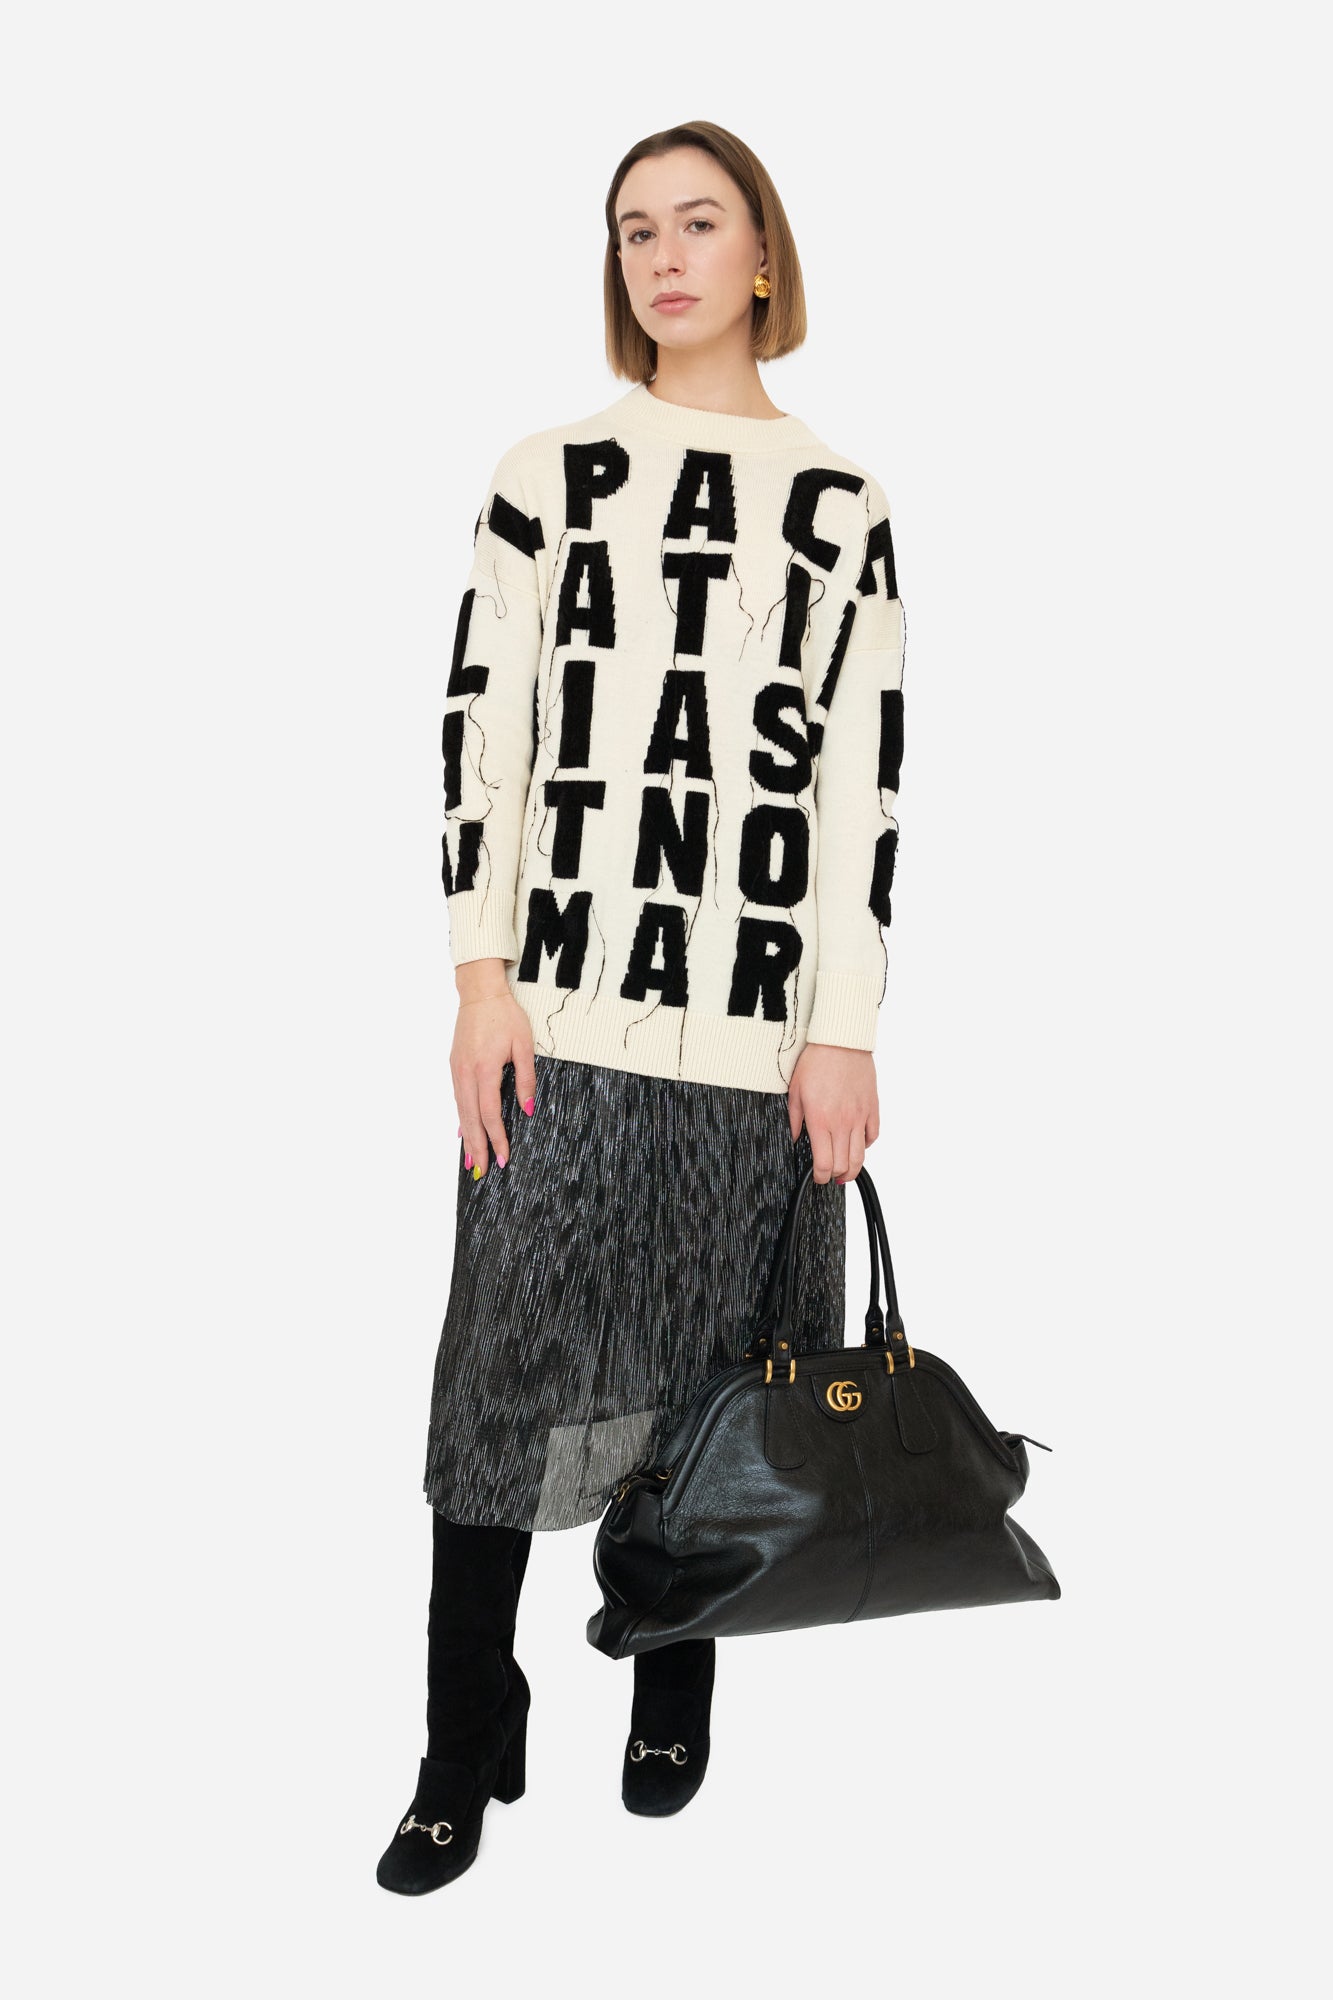 Knit Letter Sweater